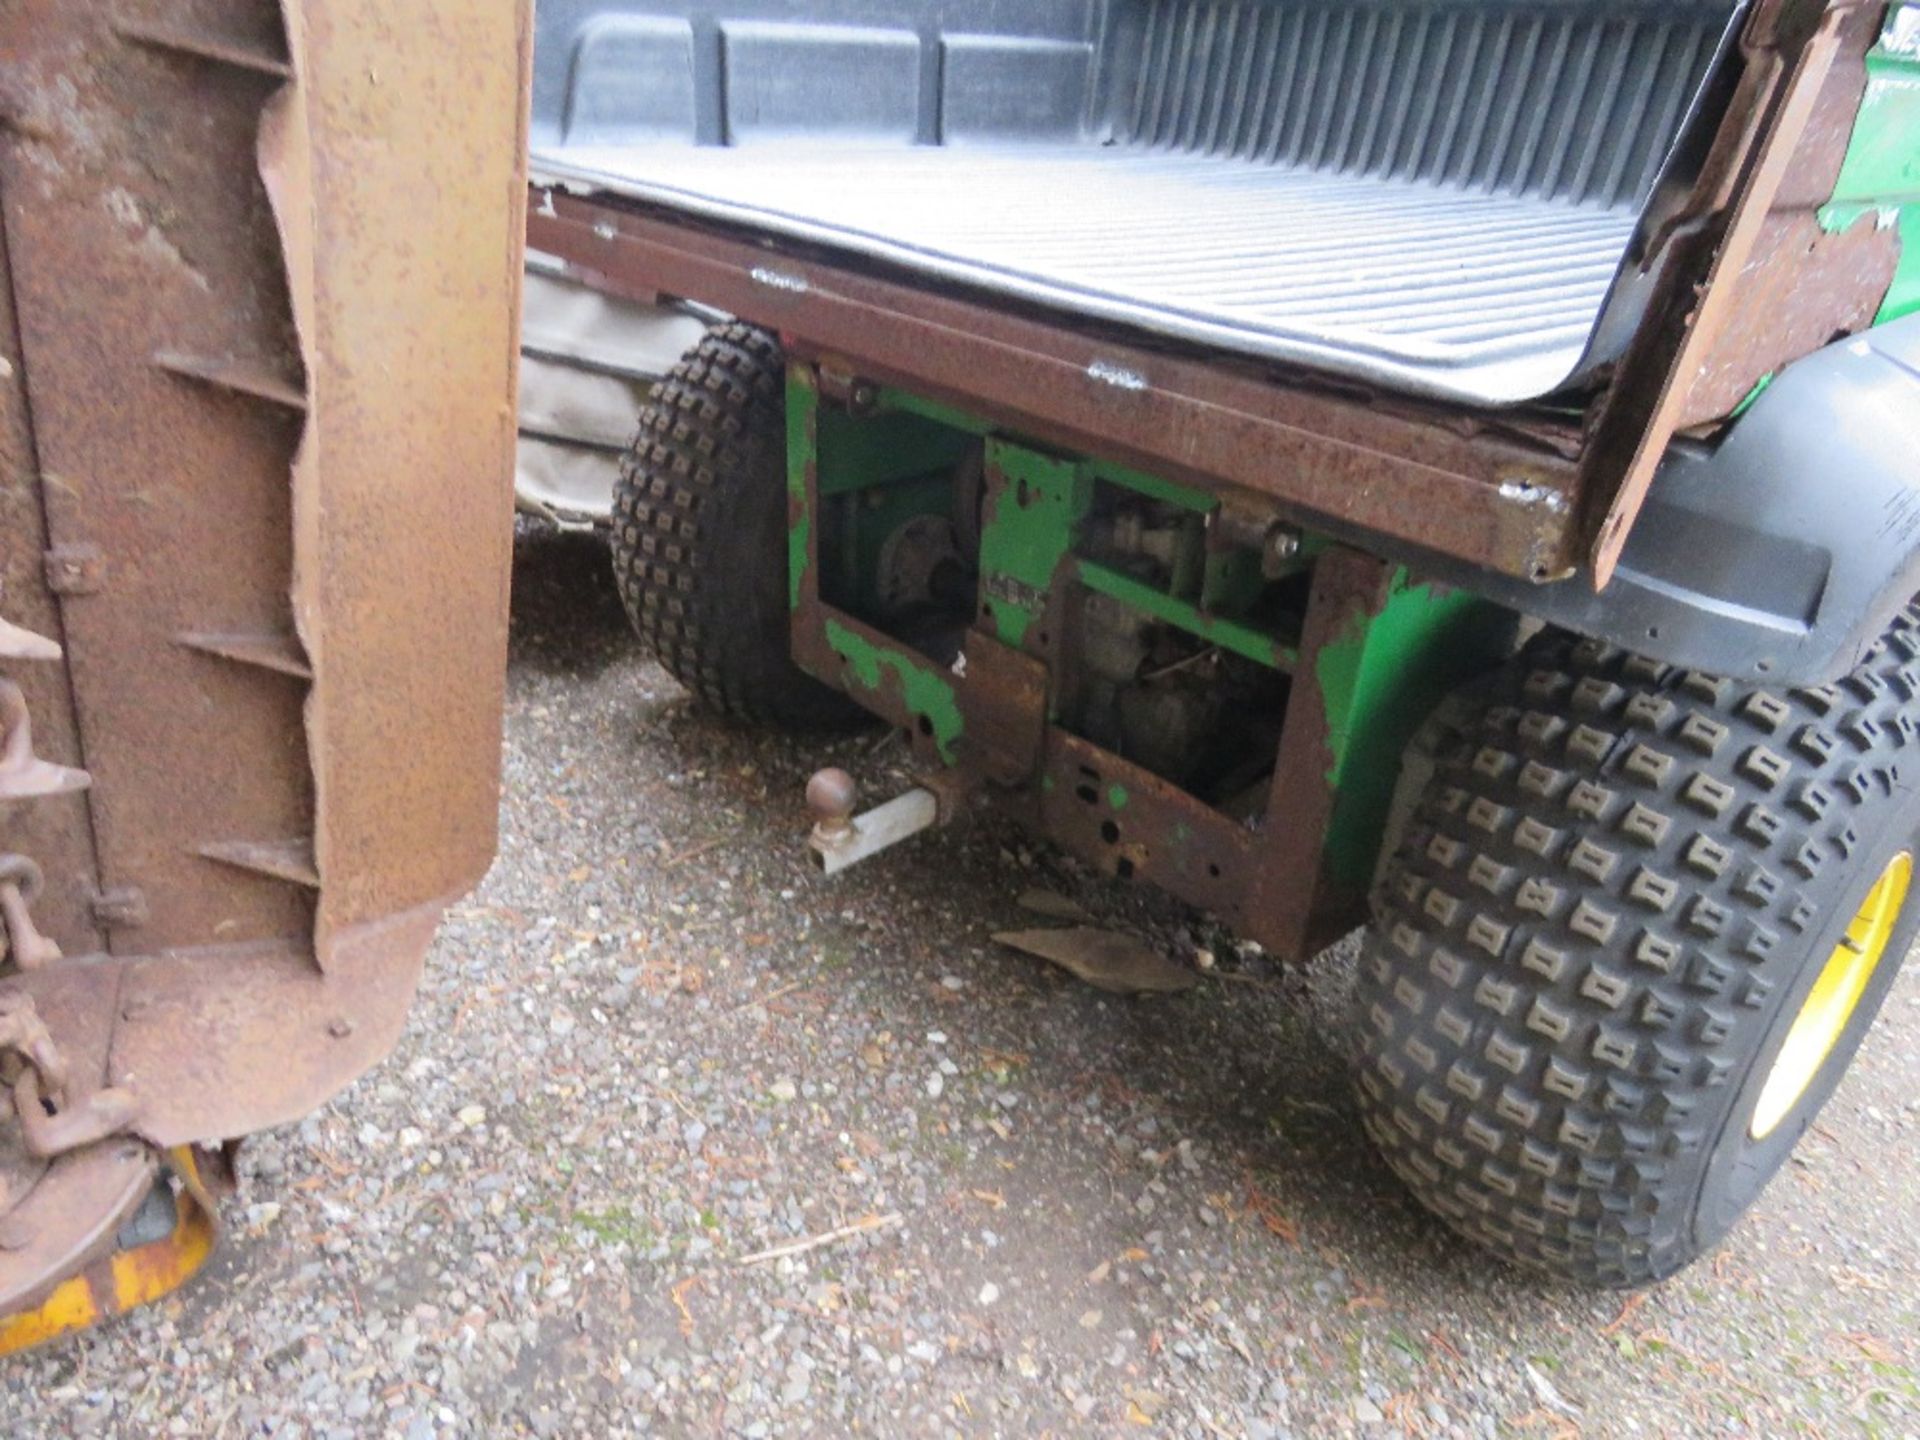 JOHN DEERE DIESEL ENGINED GATOR UTILITY VEHICLE, 2WD. WHEN TESTED WAS SEEN TO DRIVE. SEE VIDEO. - Image 6 of 6